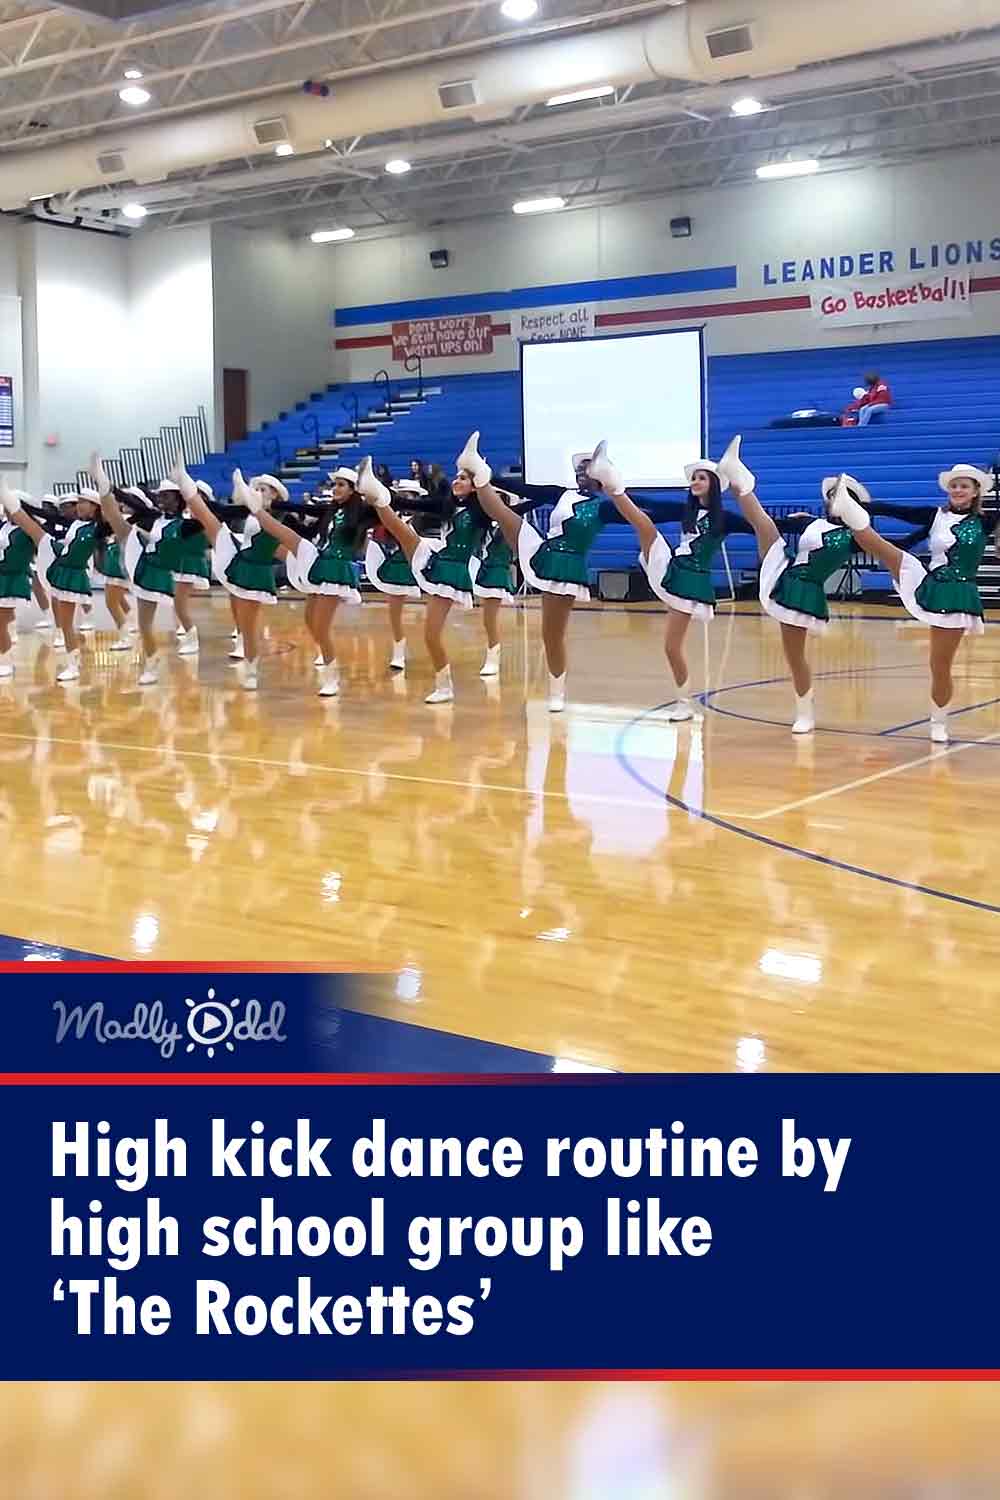 High kick dance routine by high school group like ‘The Rockettes’